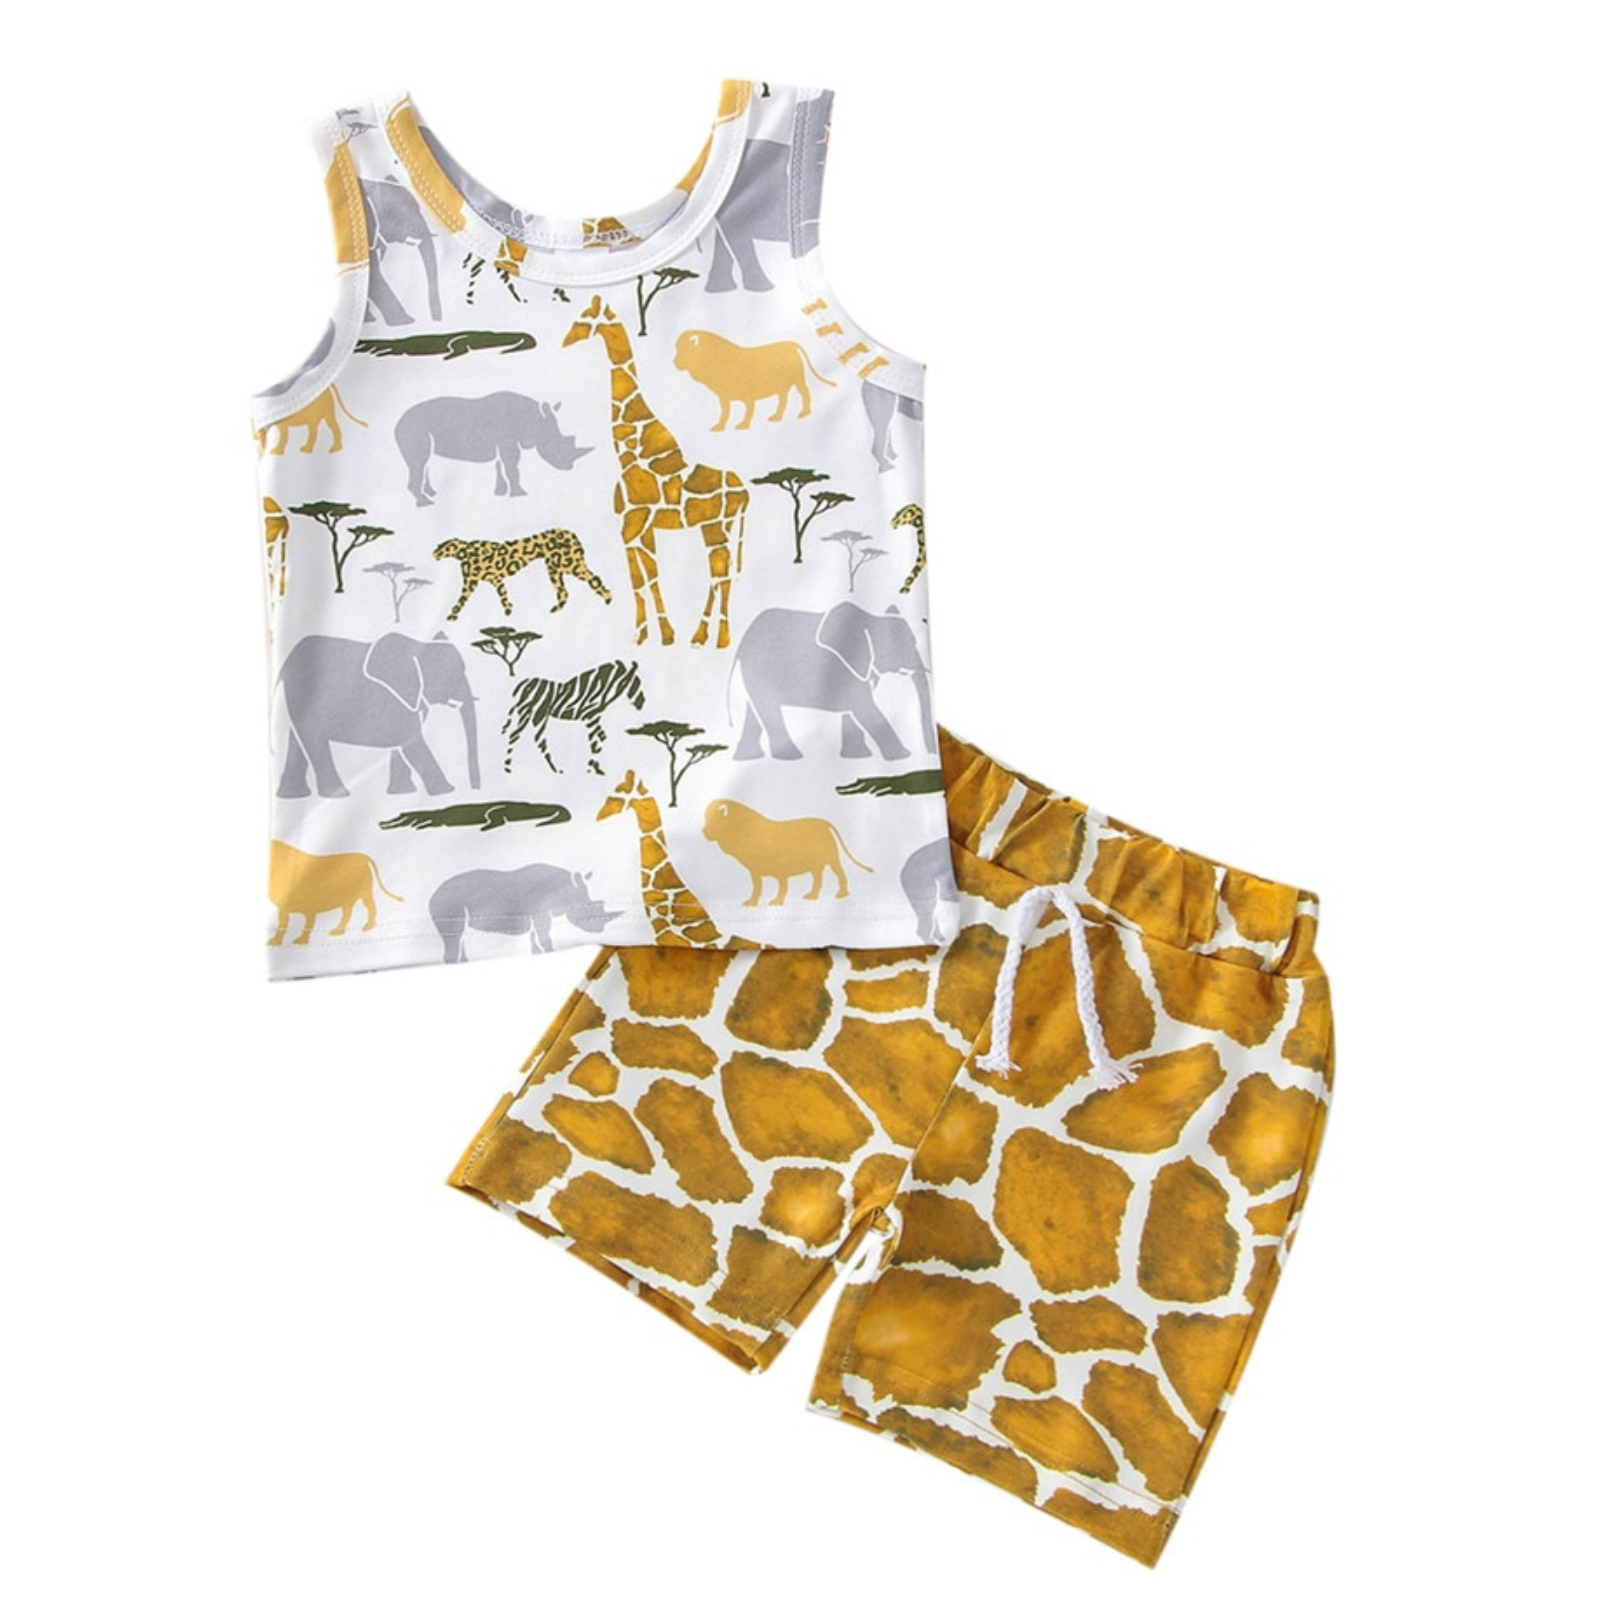 Baby Boy Animal Print Tank Set - My Trendy Youngsters | Buy on-trend and stylish Baby and Toddler Clothing Sets @ My Trendy Youngsters - Dress your little one in Style @ My Trendy Youngsters